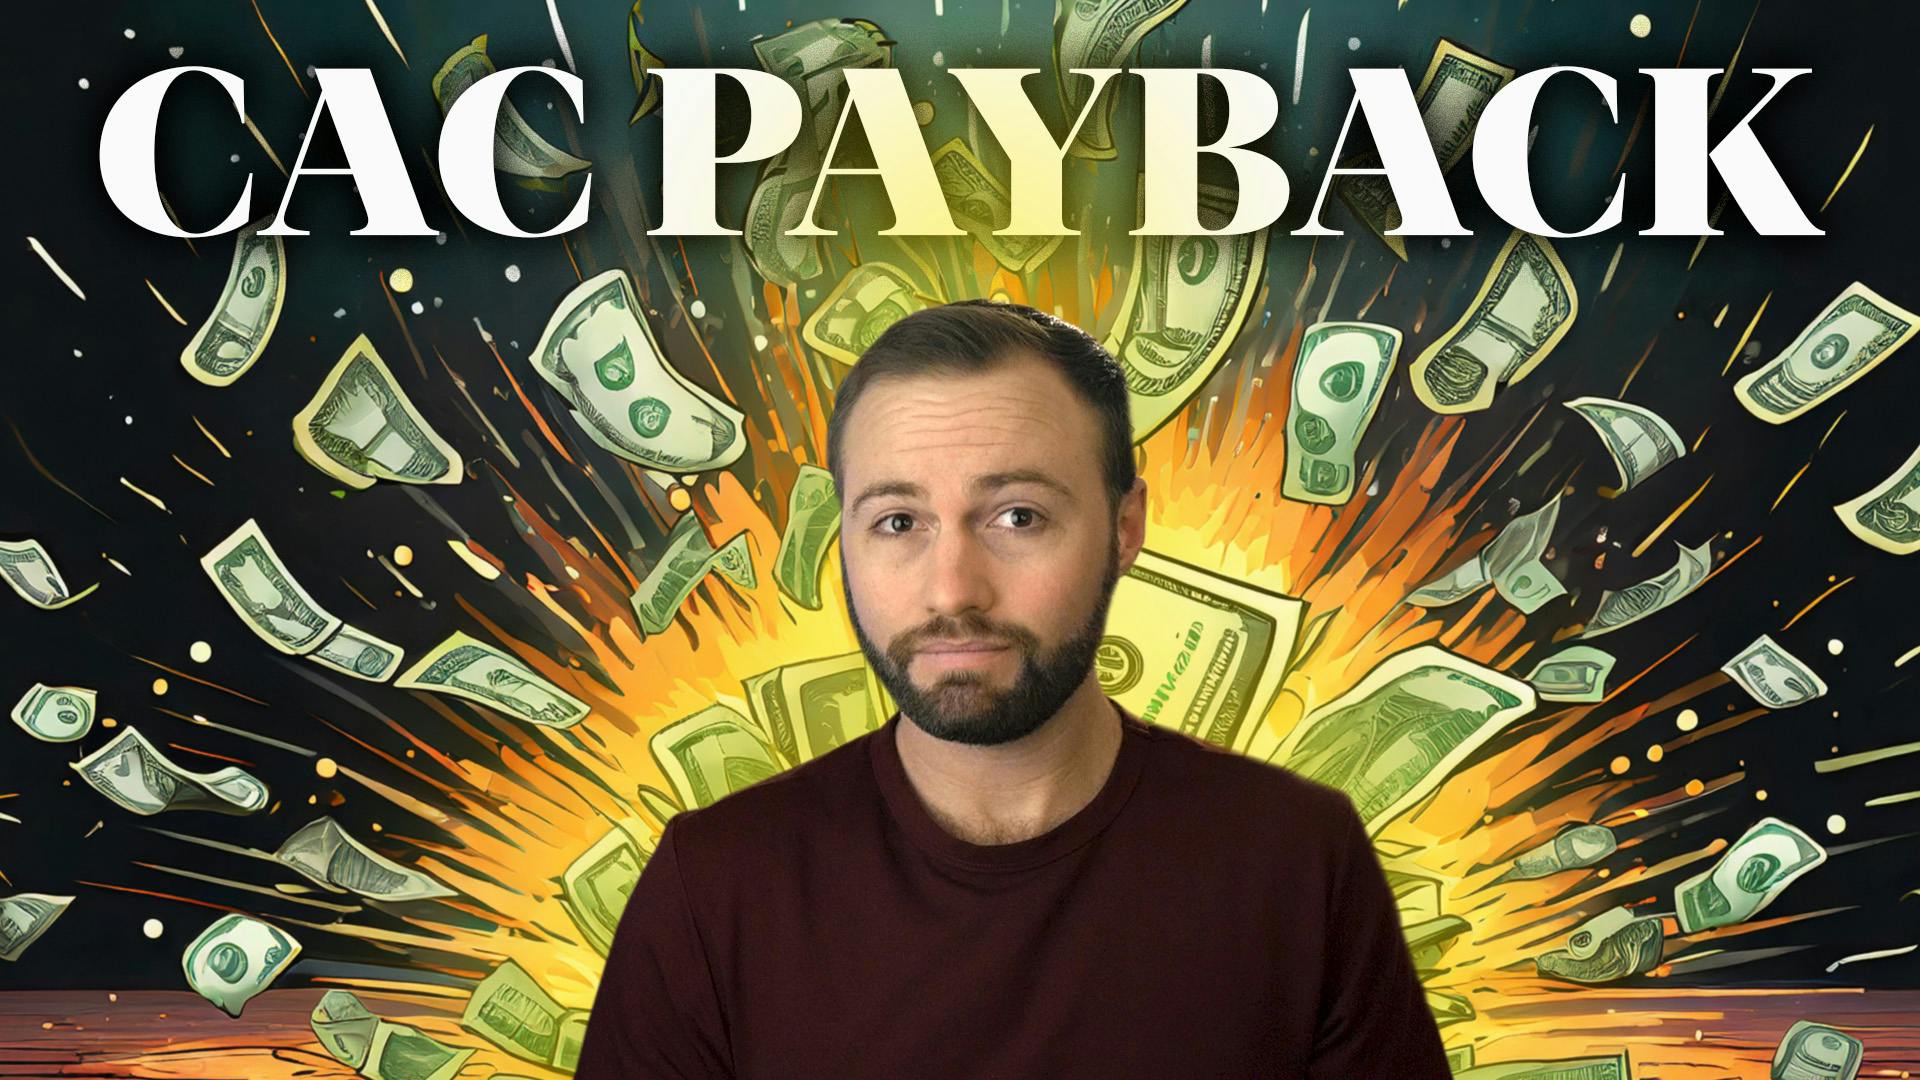 CAC PAYBACK text above Ben Hillman who is in front of an exploding pile of cash